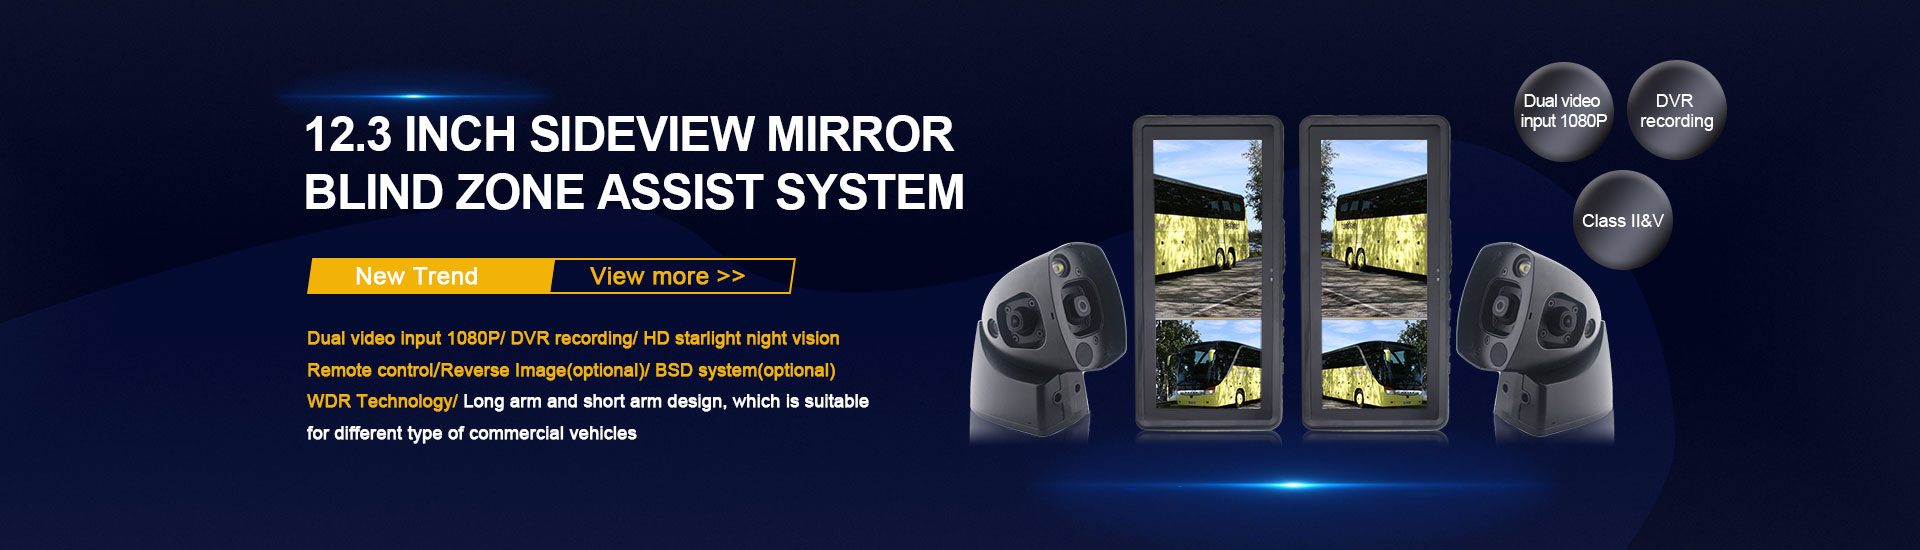 12.3inch Sideview Mirror Blind Zone Assist System